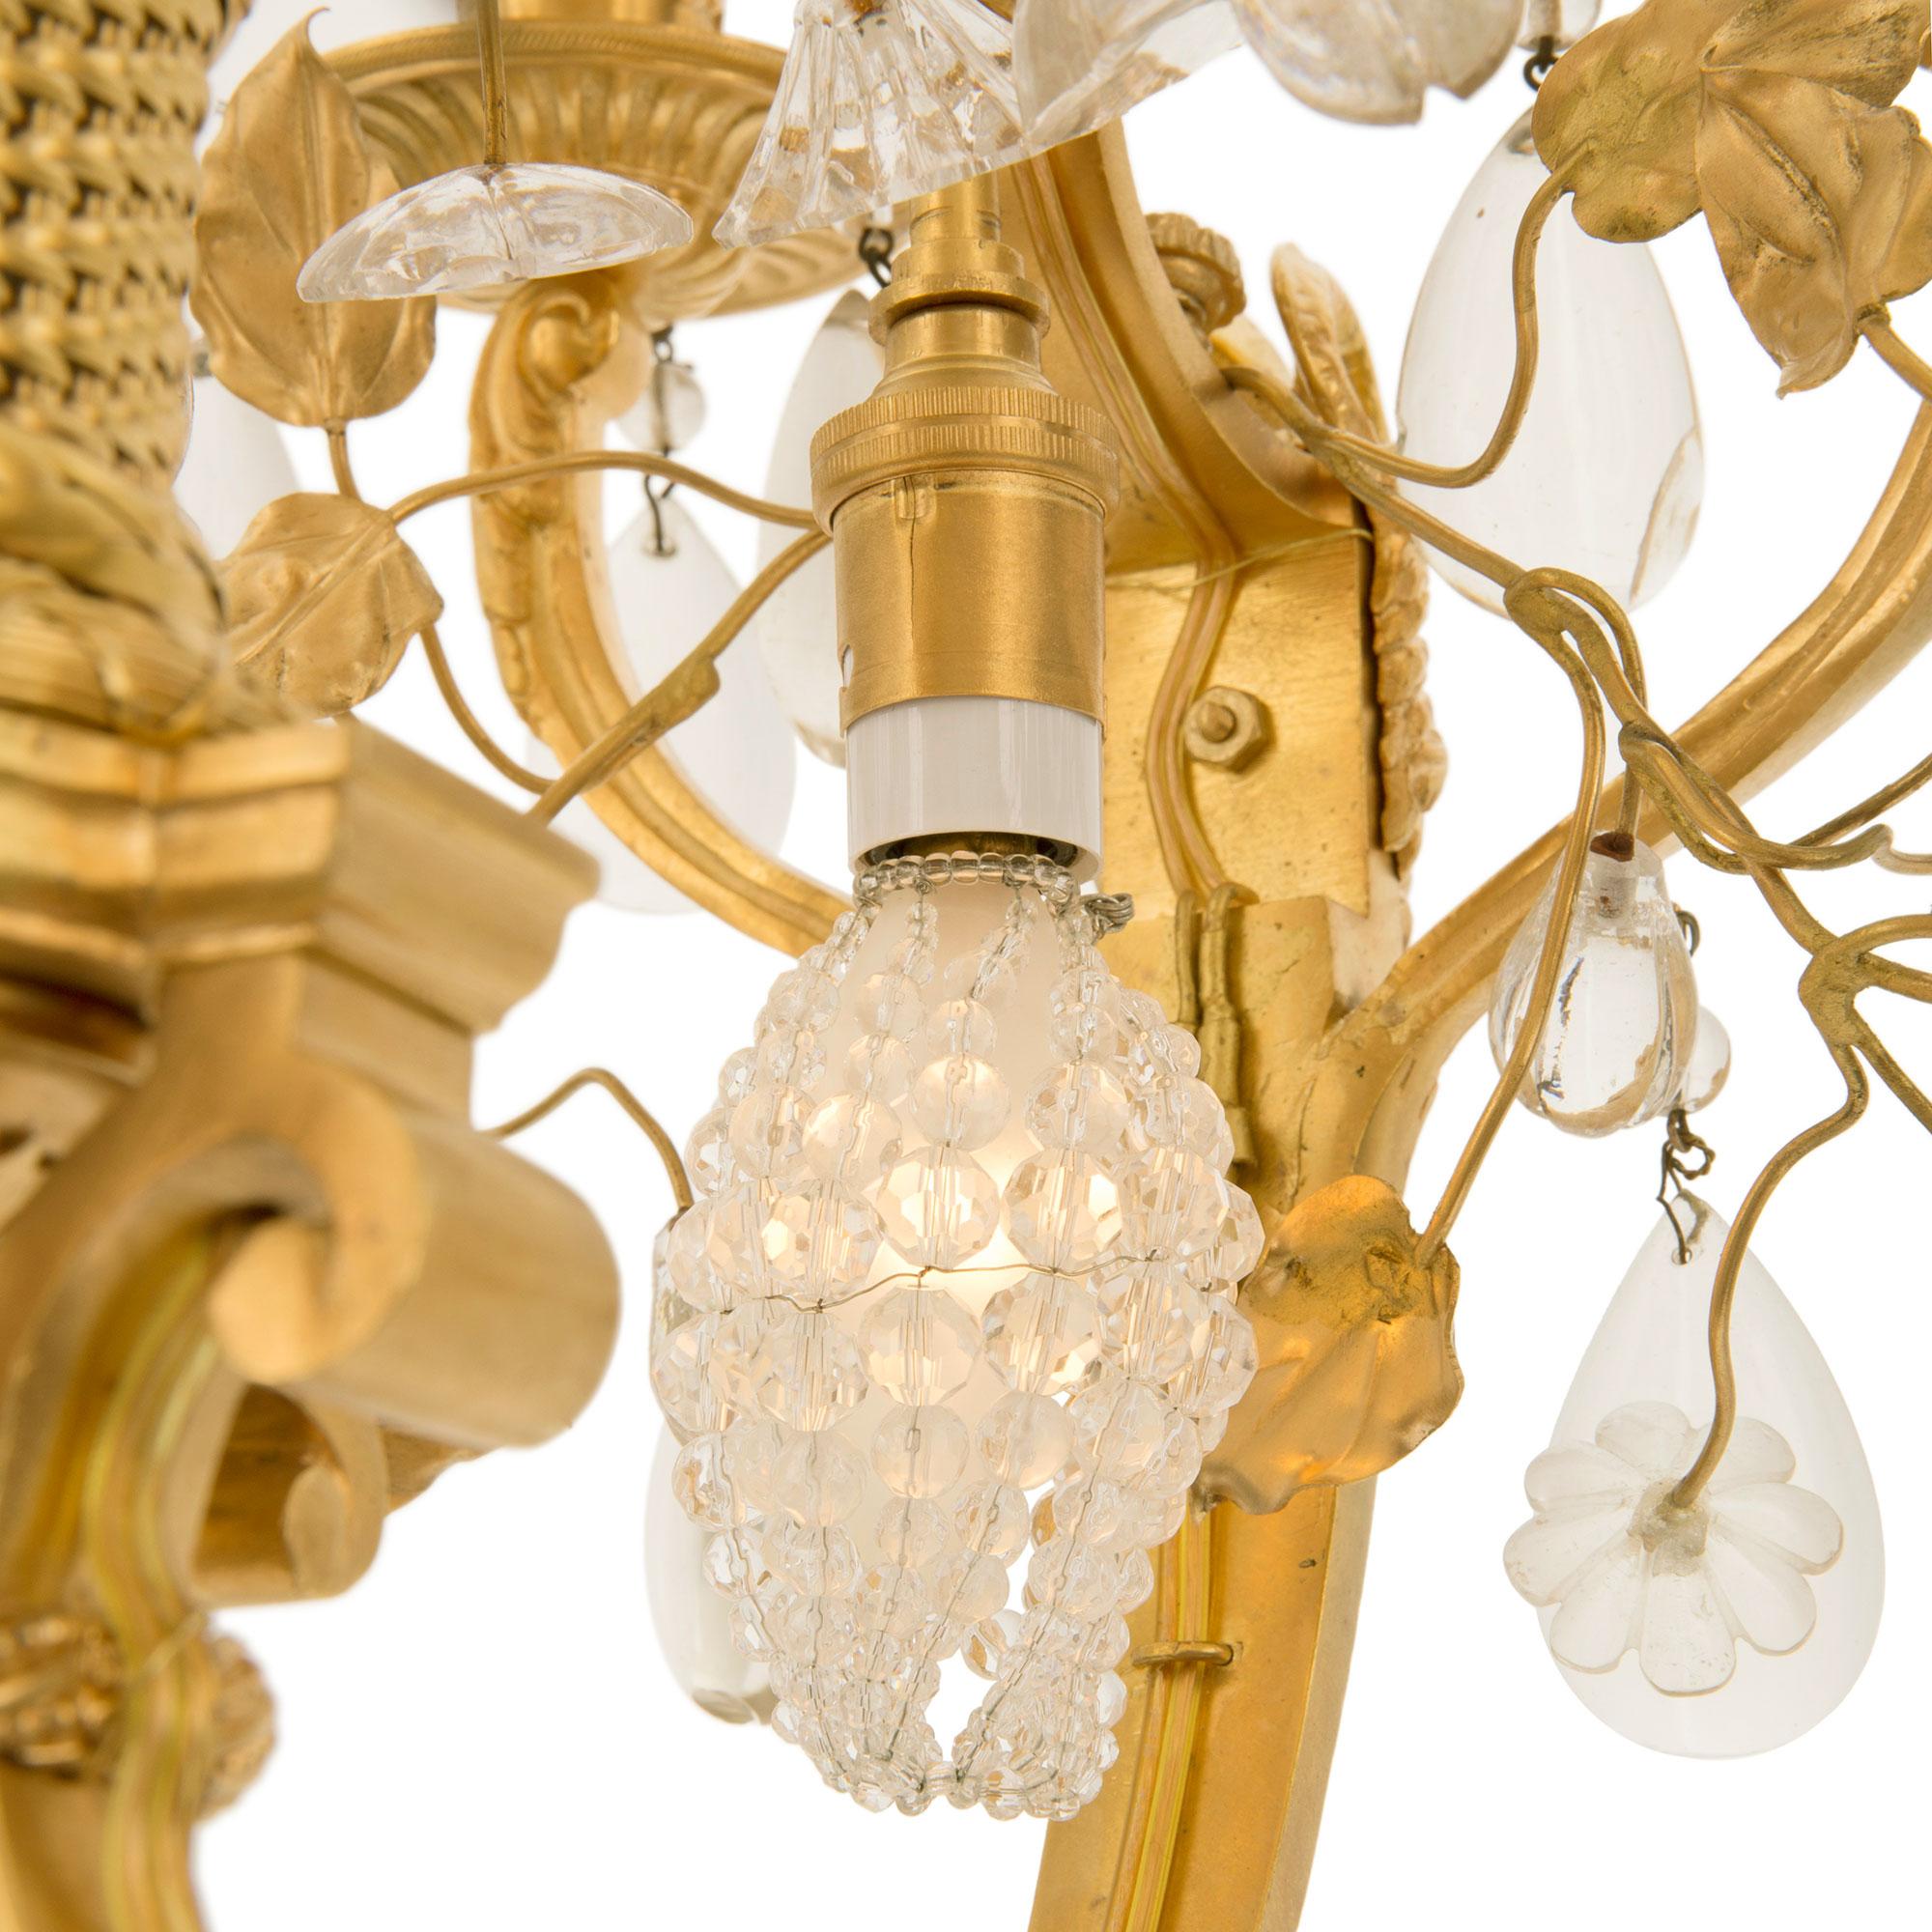 French 19th Century Belle Époque Period Ormolu and Baccarat Crystal Chandelier For Sale 3